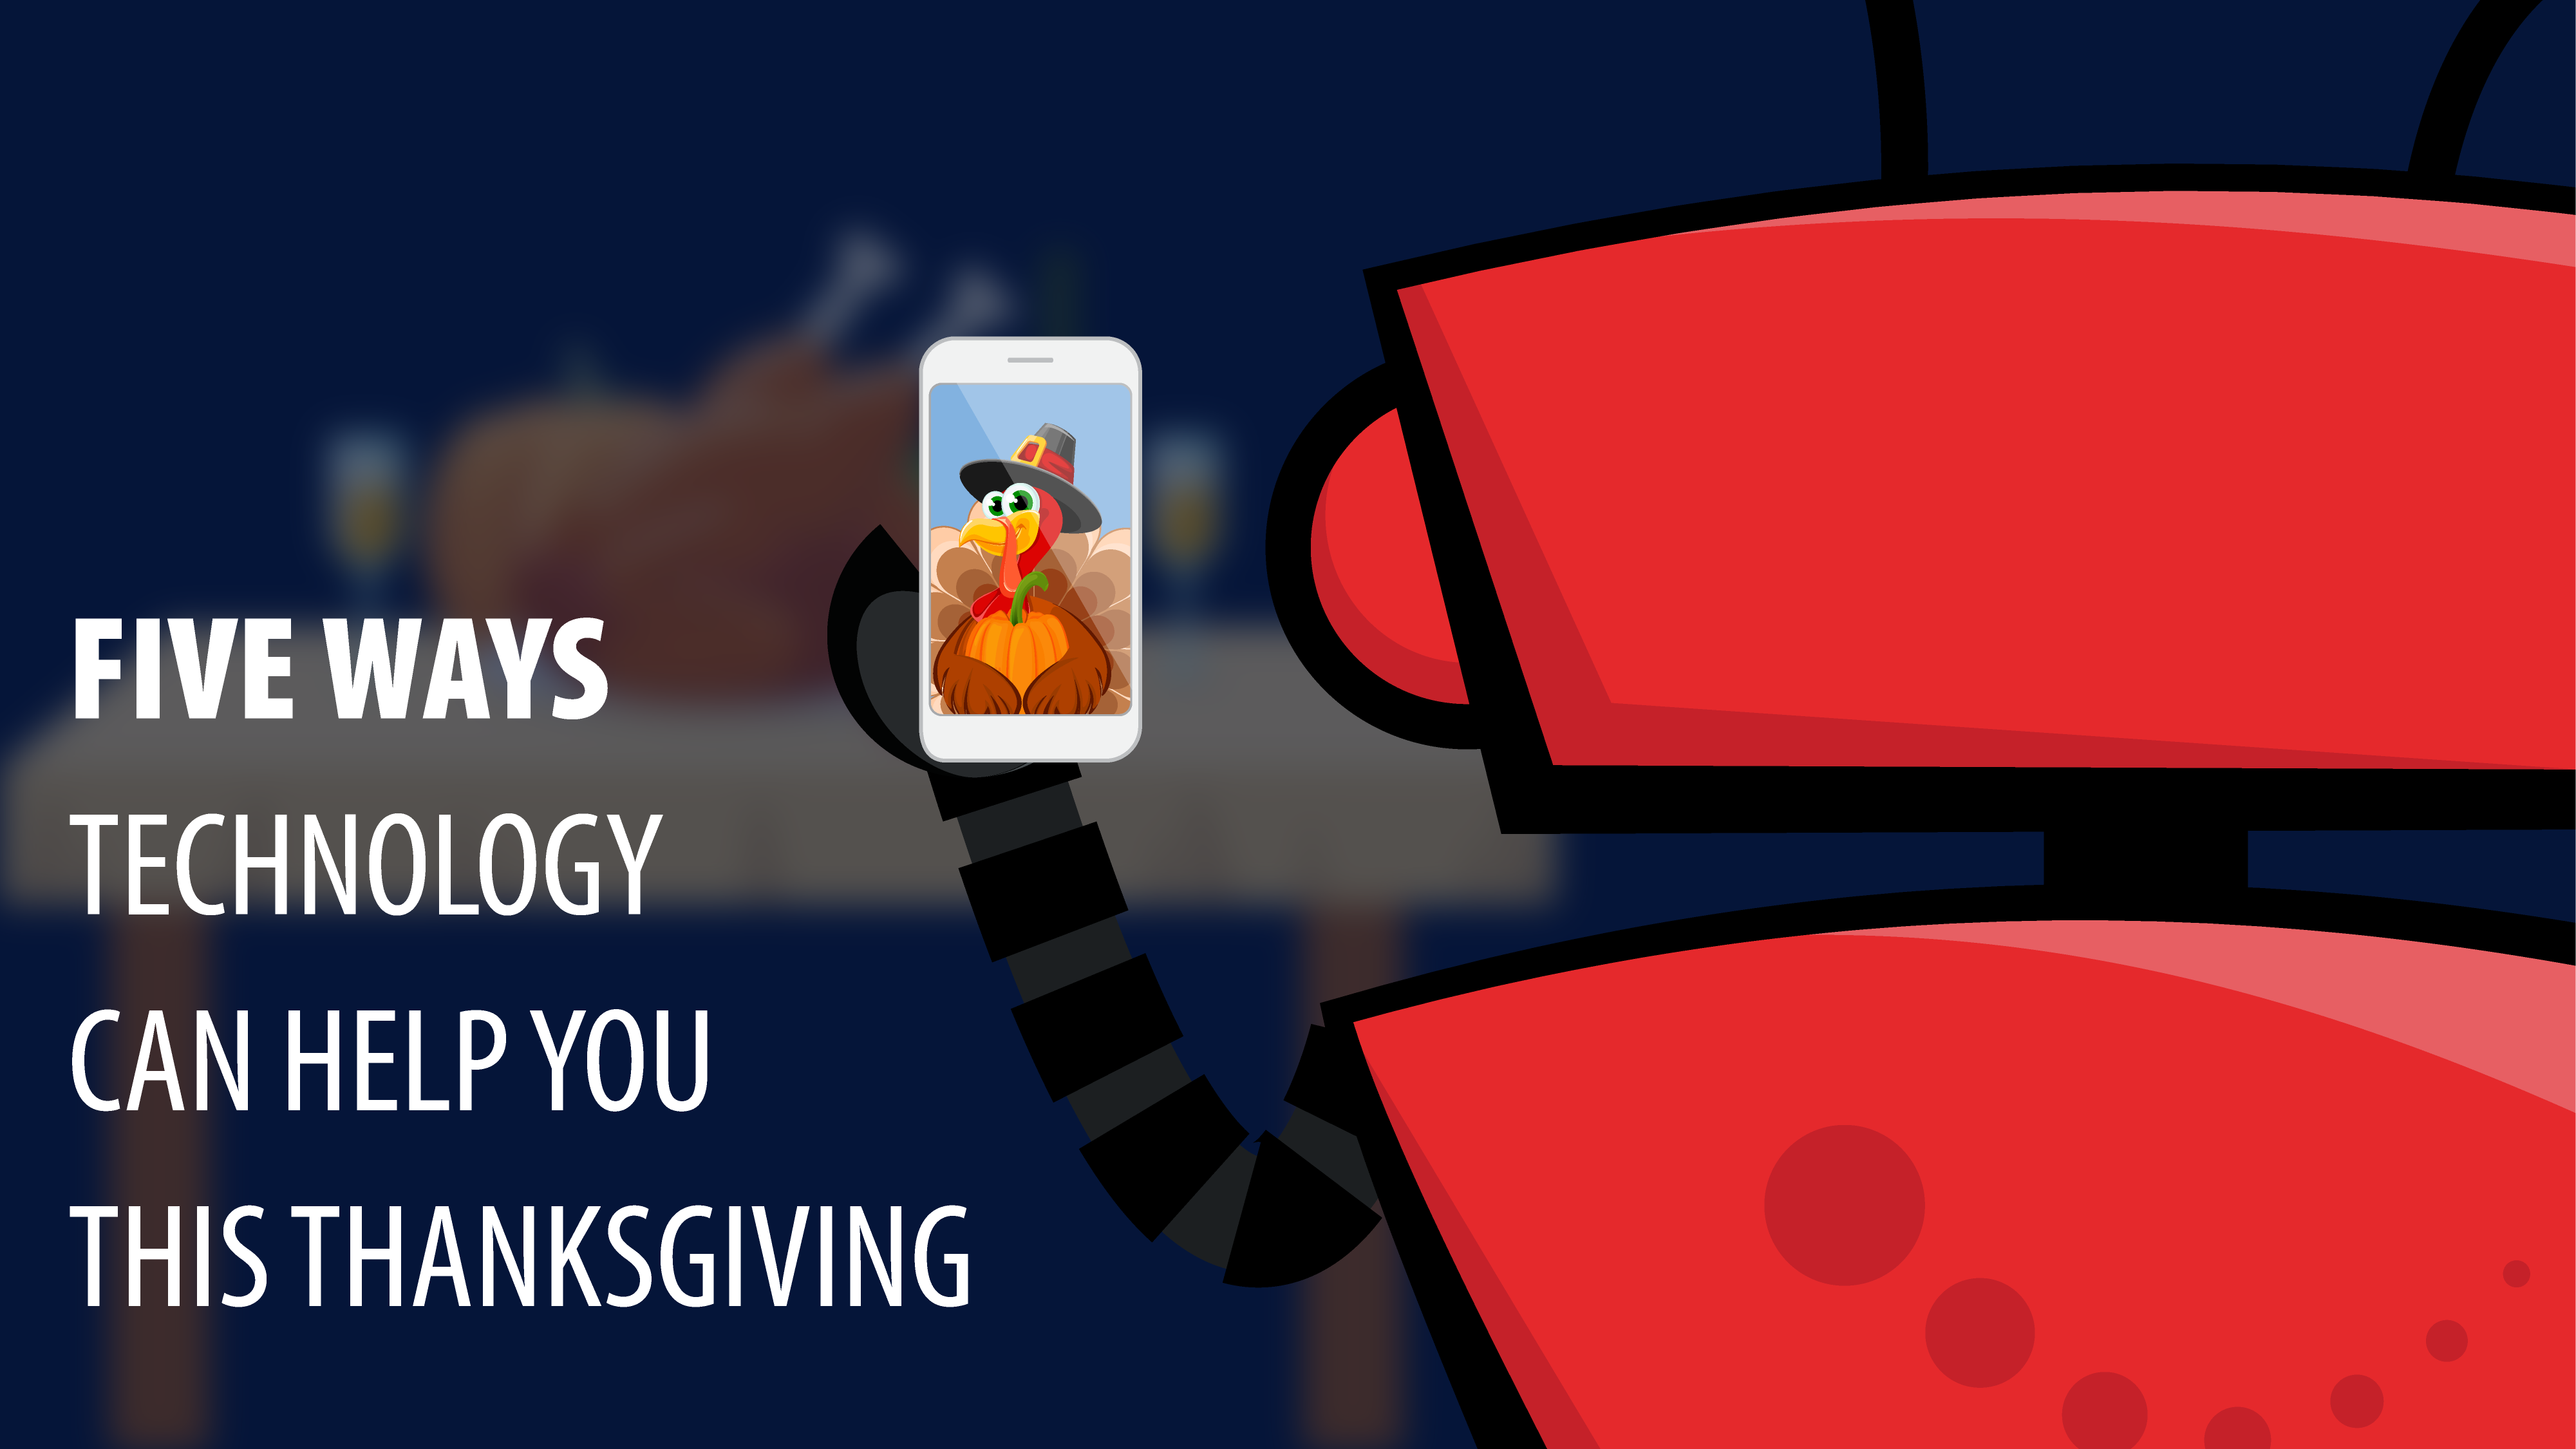 Five Ways Technology Can Help You This Thanksgiving